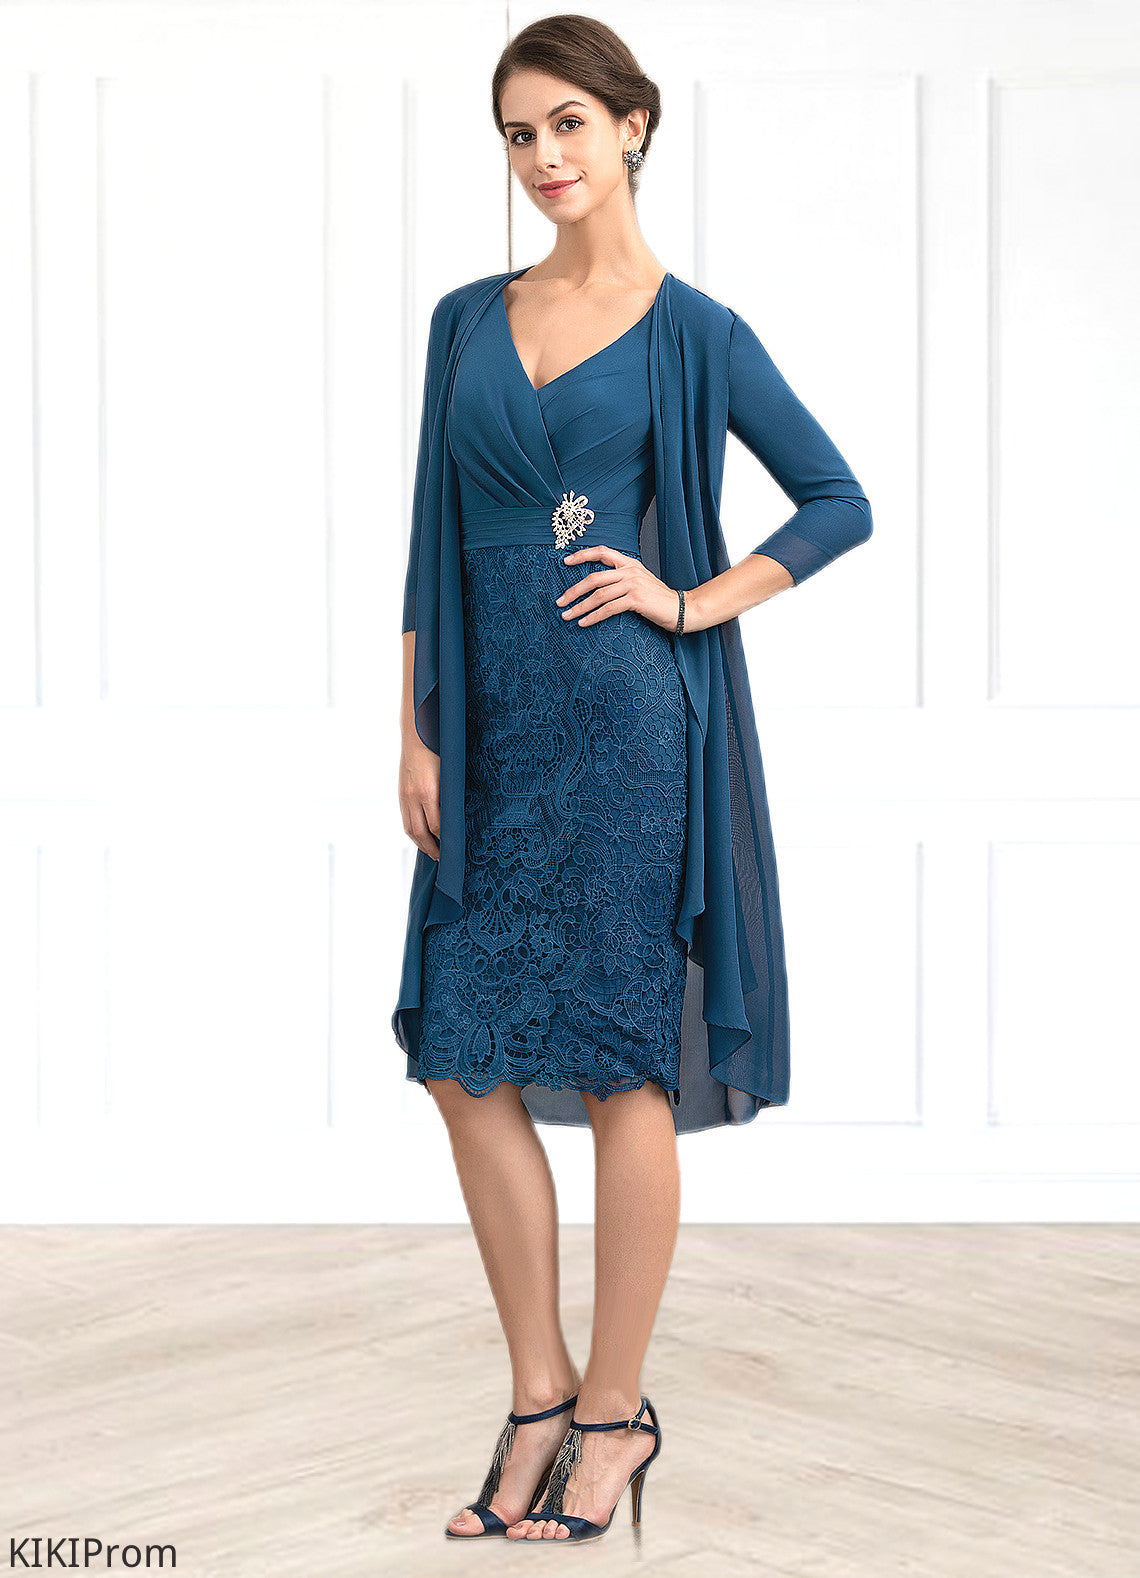 Madilyn Sheath/Column V-neck Knee-Length Chiffon Lace Mother of the Bride Dress With Crystal Brooch DZ126P0014972